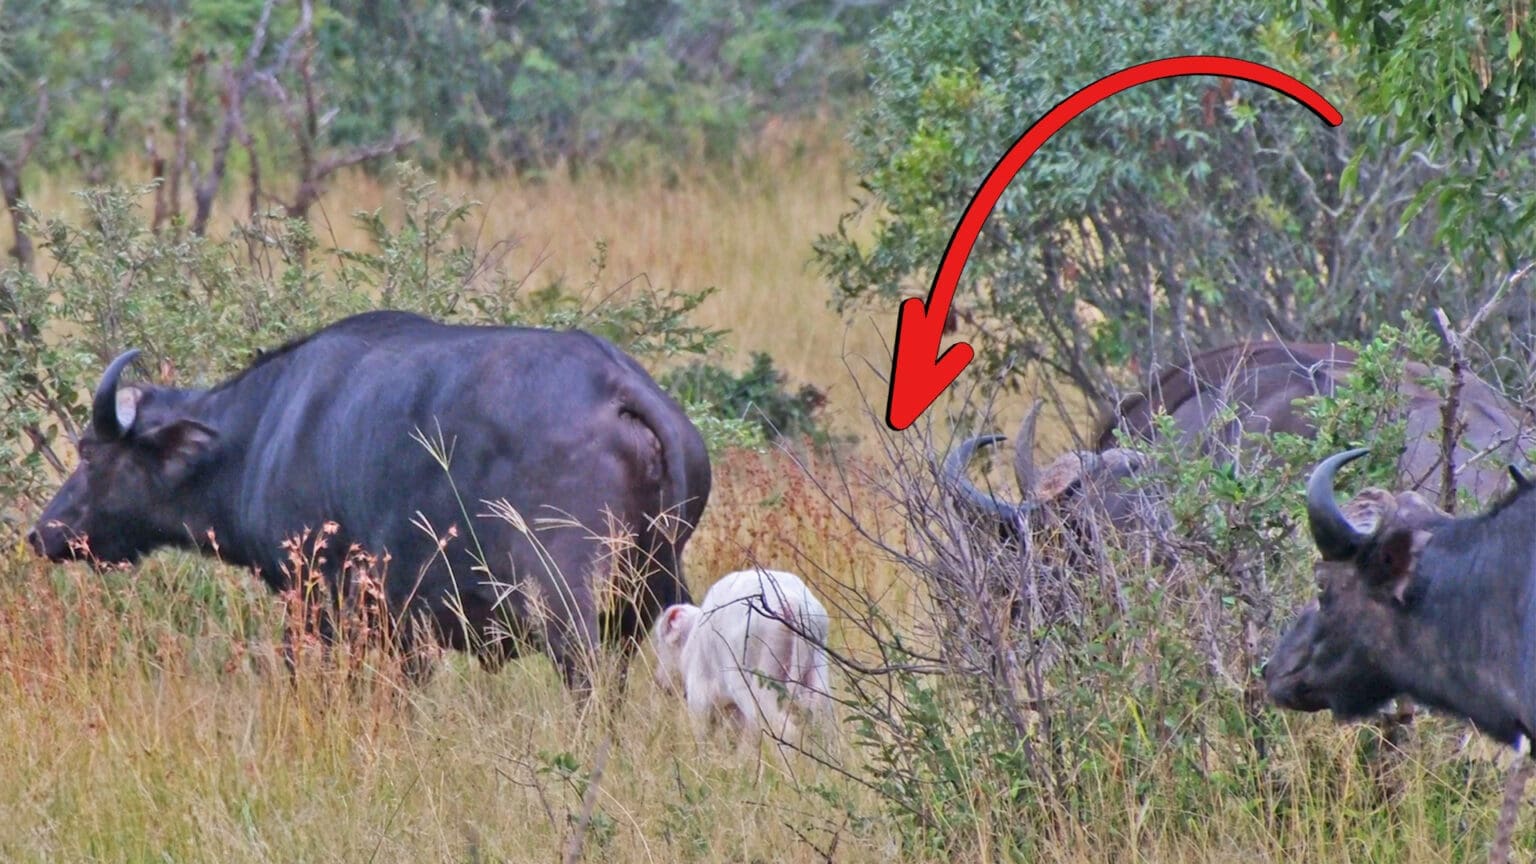 White Buffalo spotted in Kruger National Park